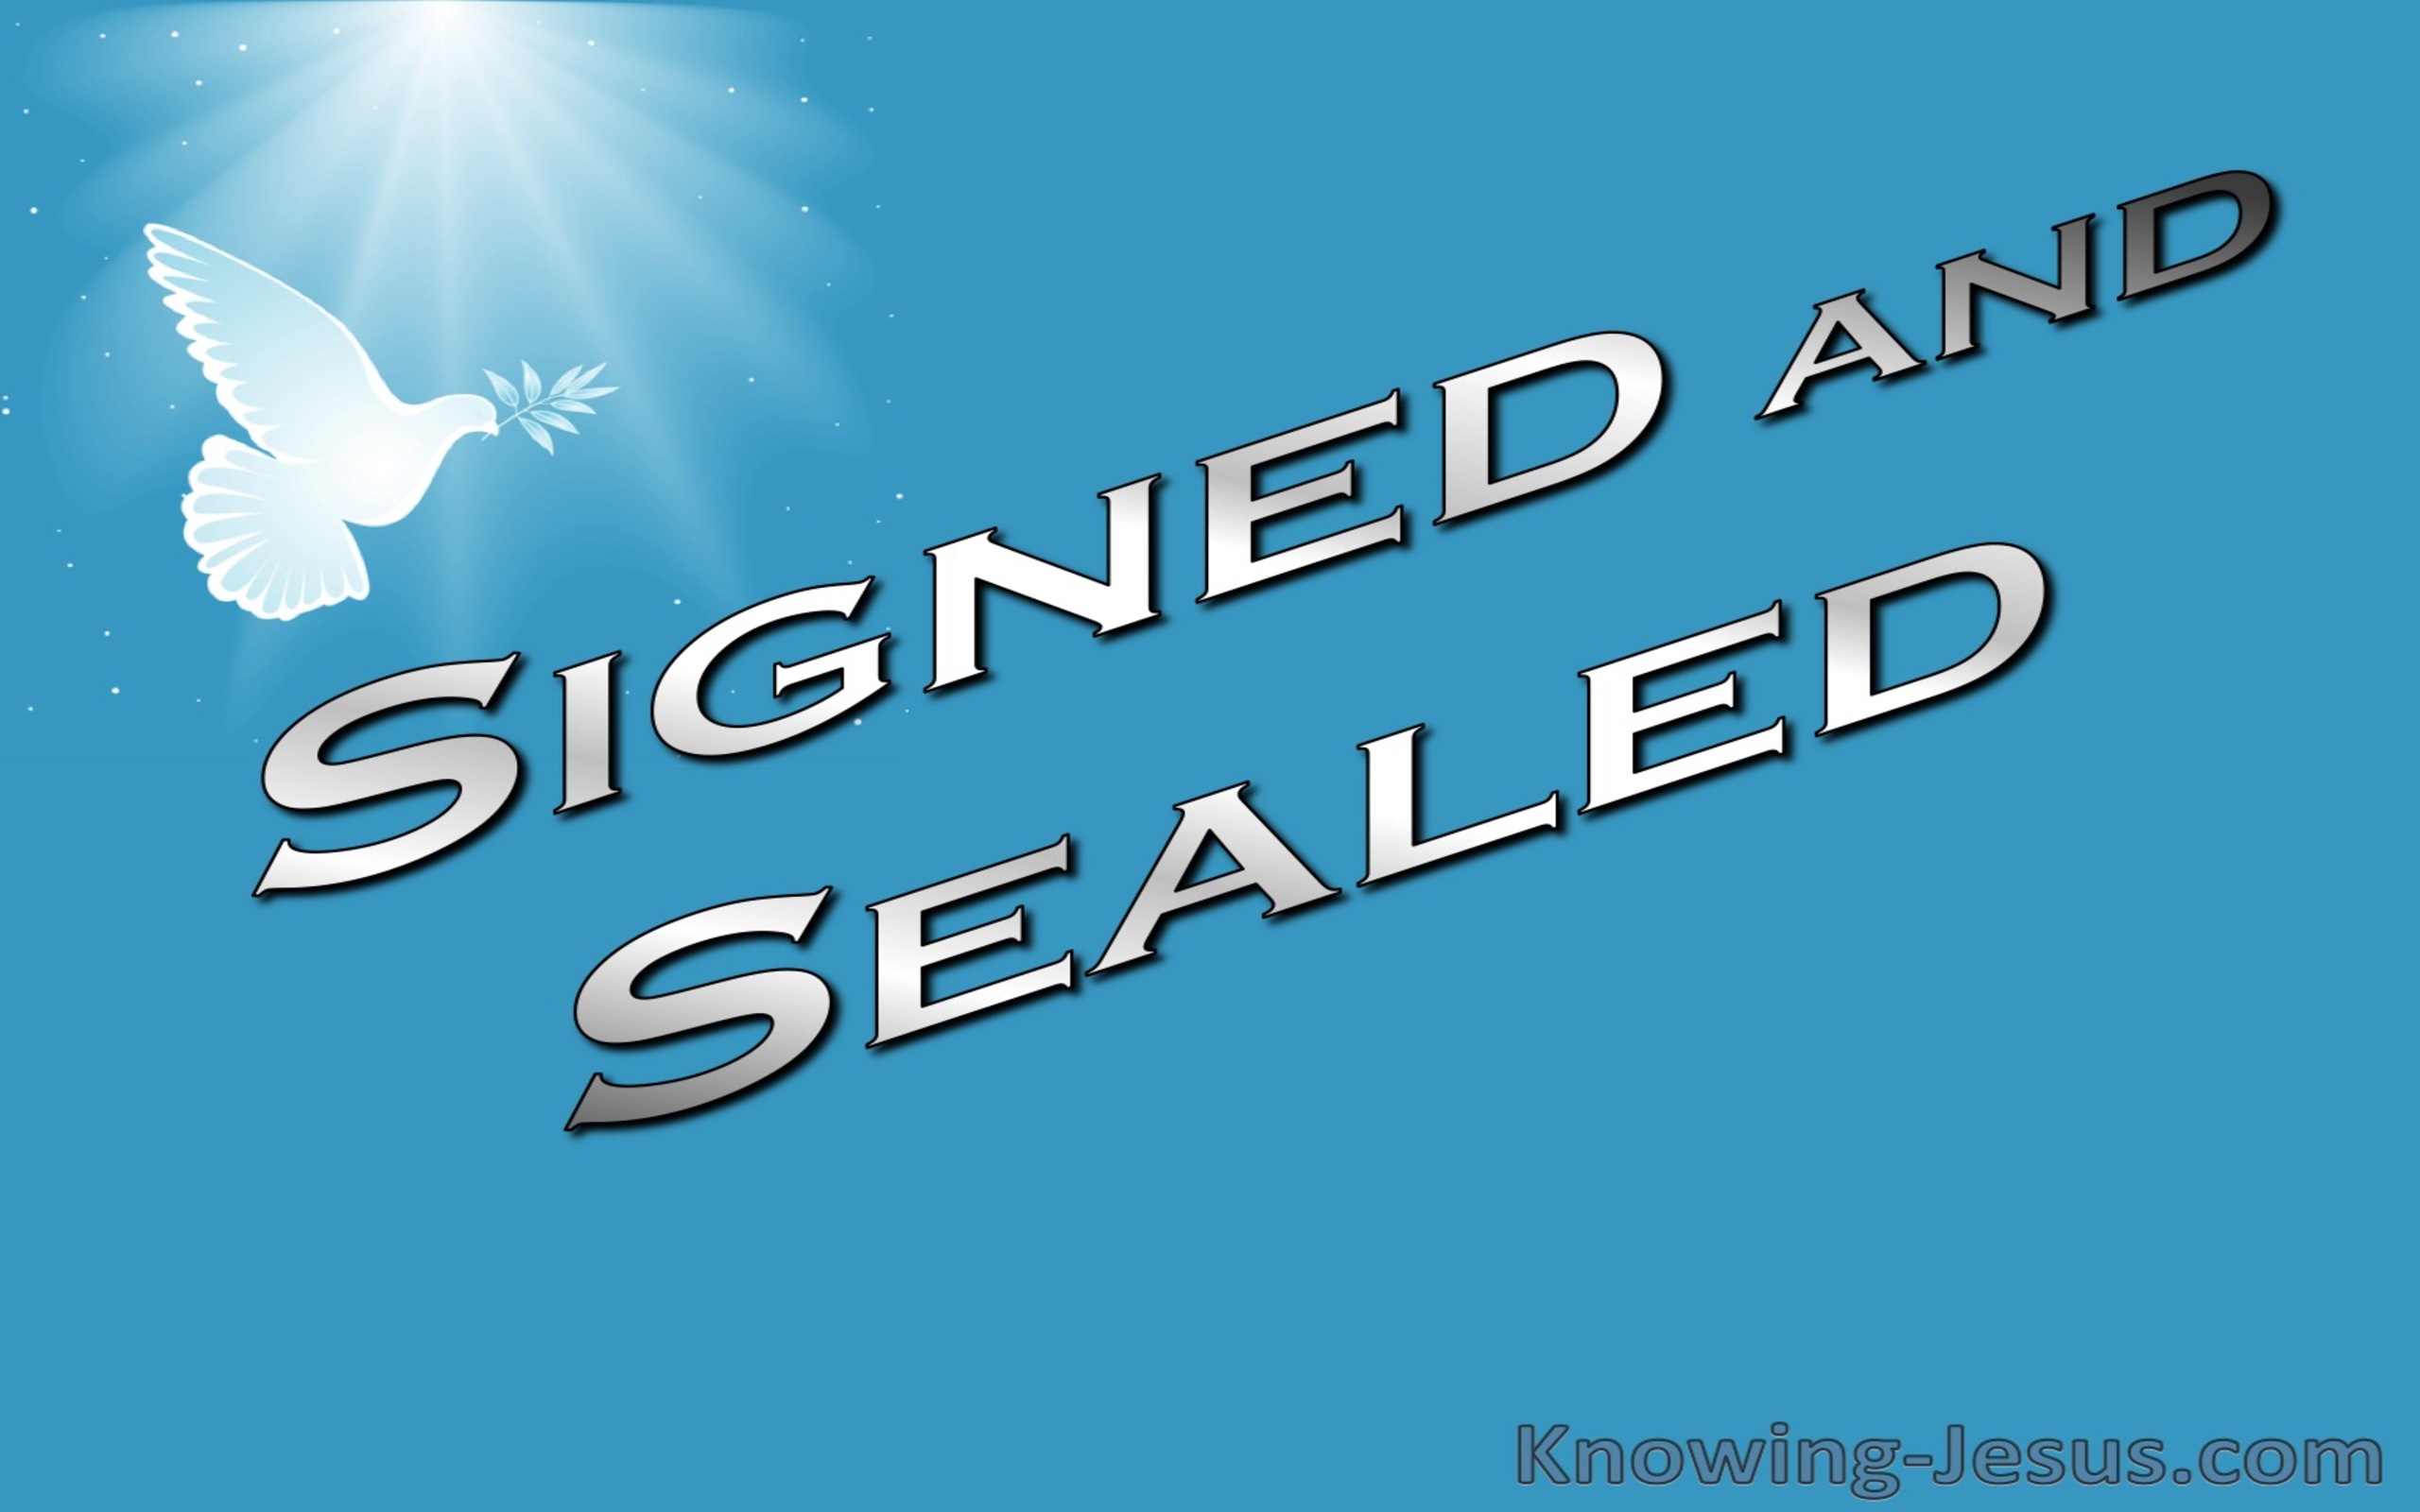 Signed and Sealed (devotional)12-13 (blue)